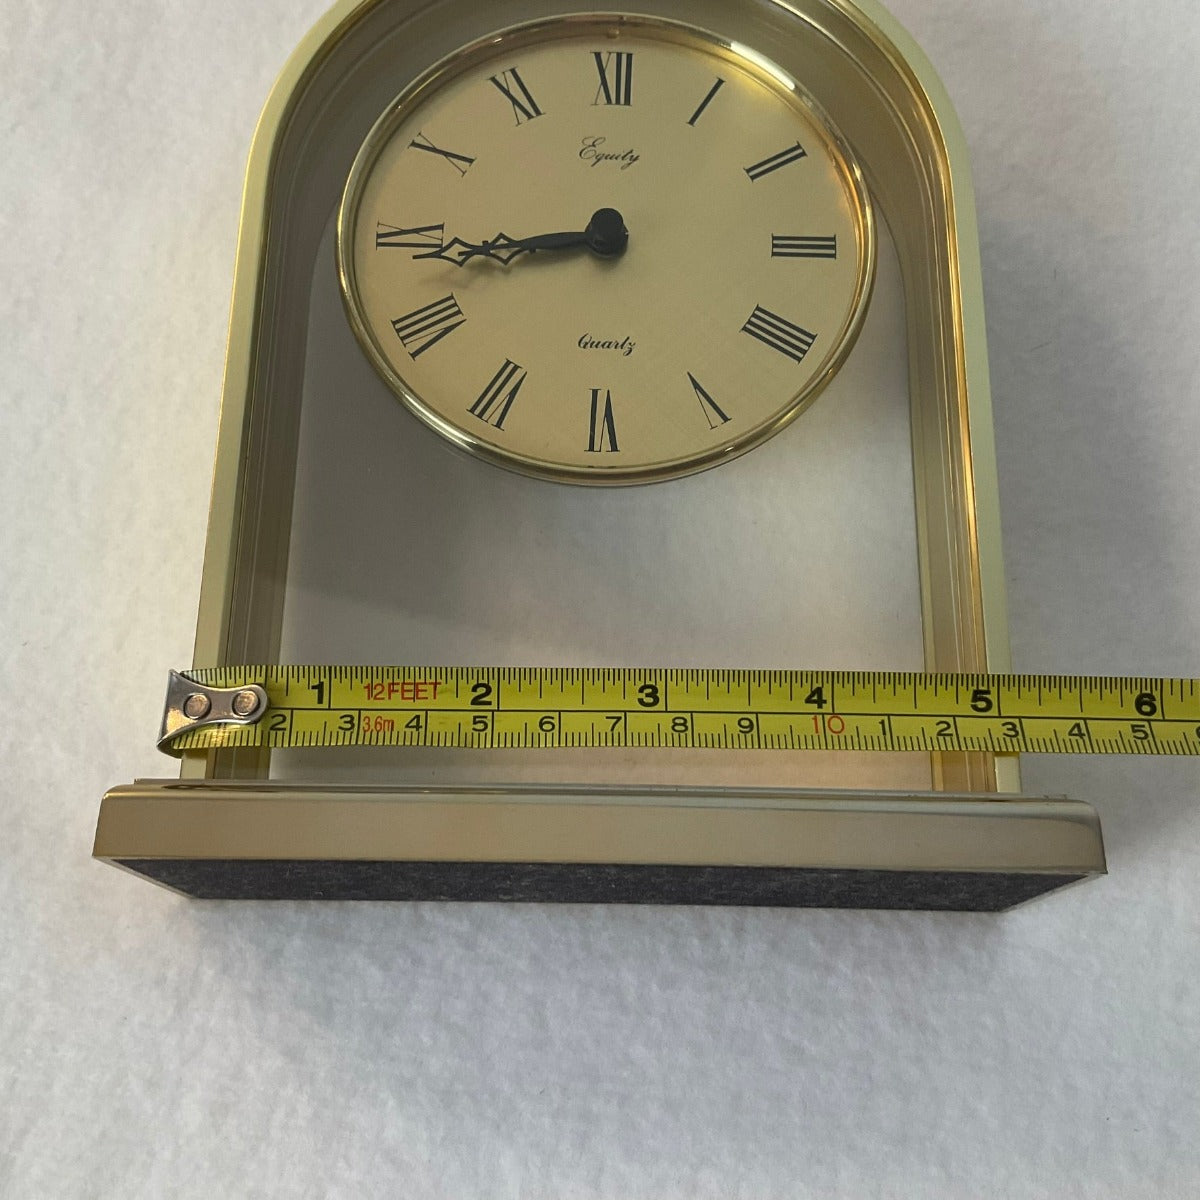 Equity Clock Quartz Vintage Analog Table Mantle Clock in Brass - 5 inches wide